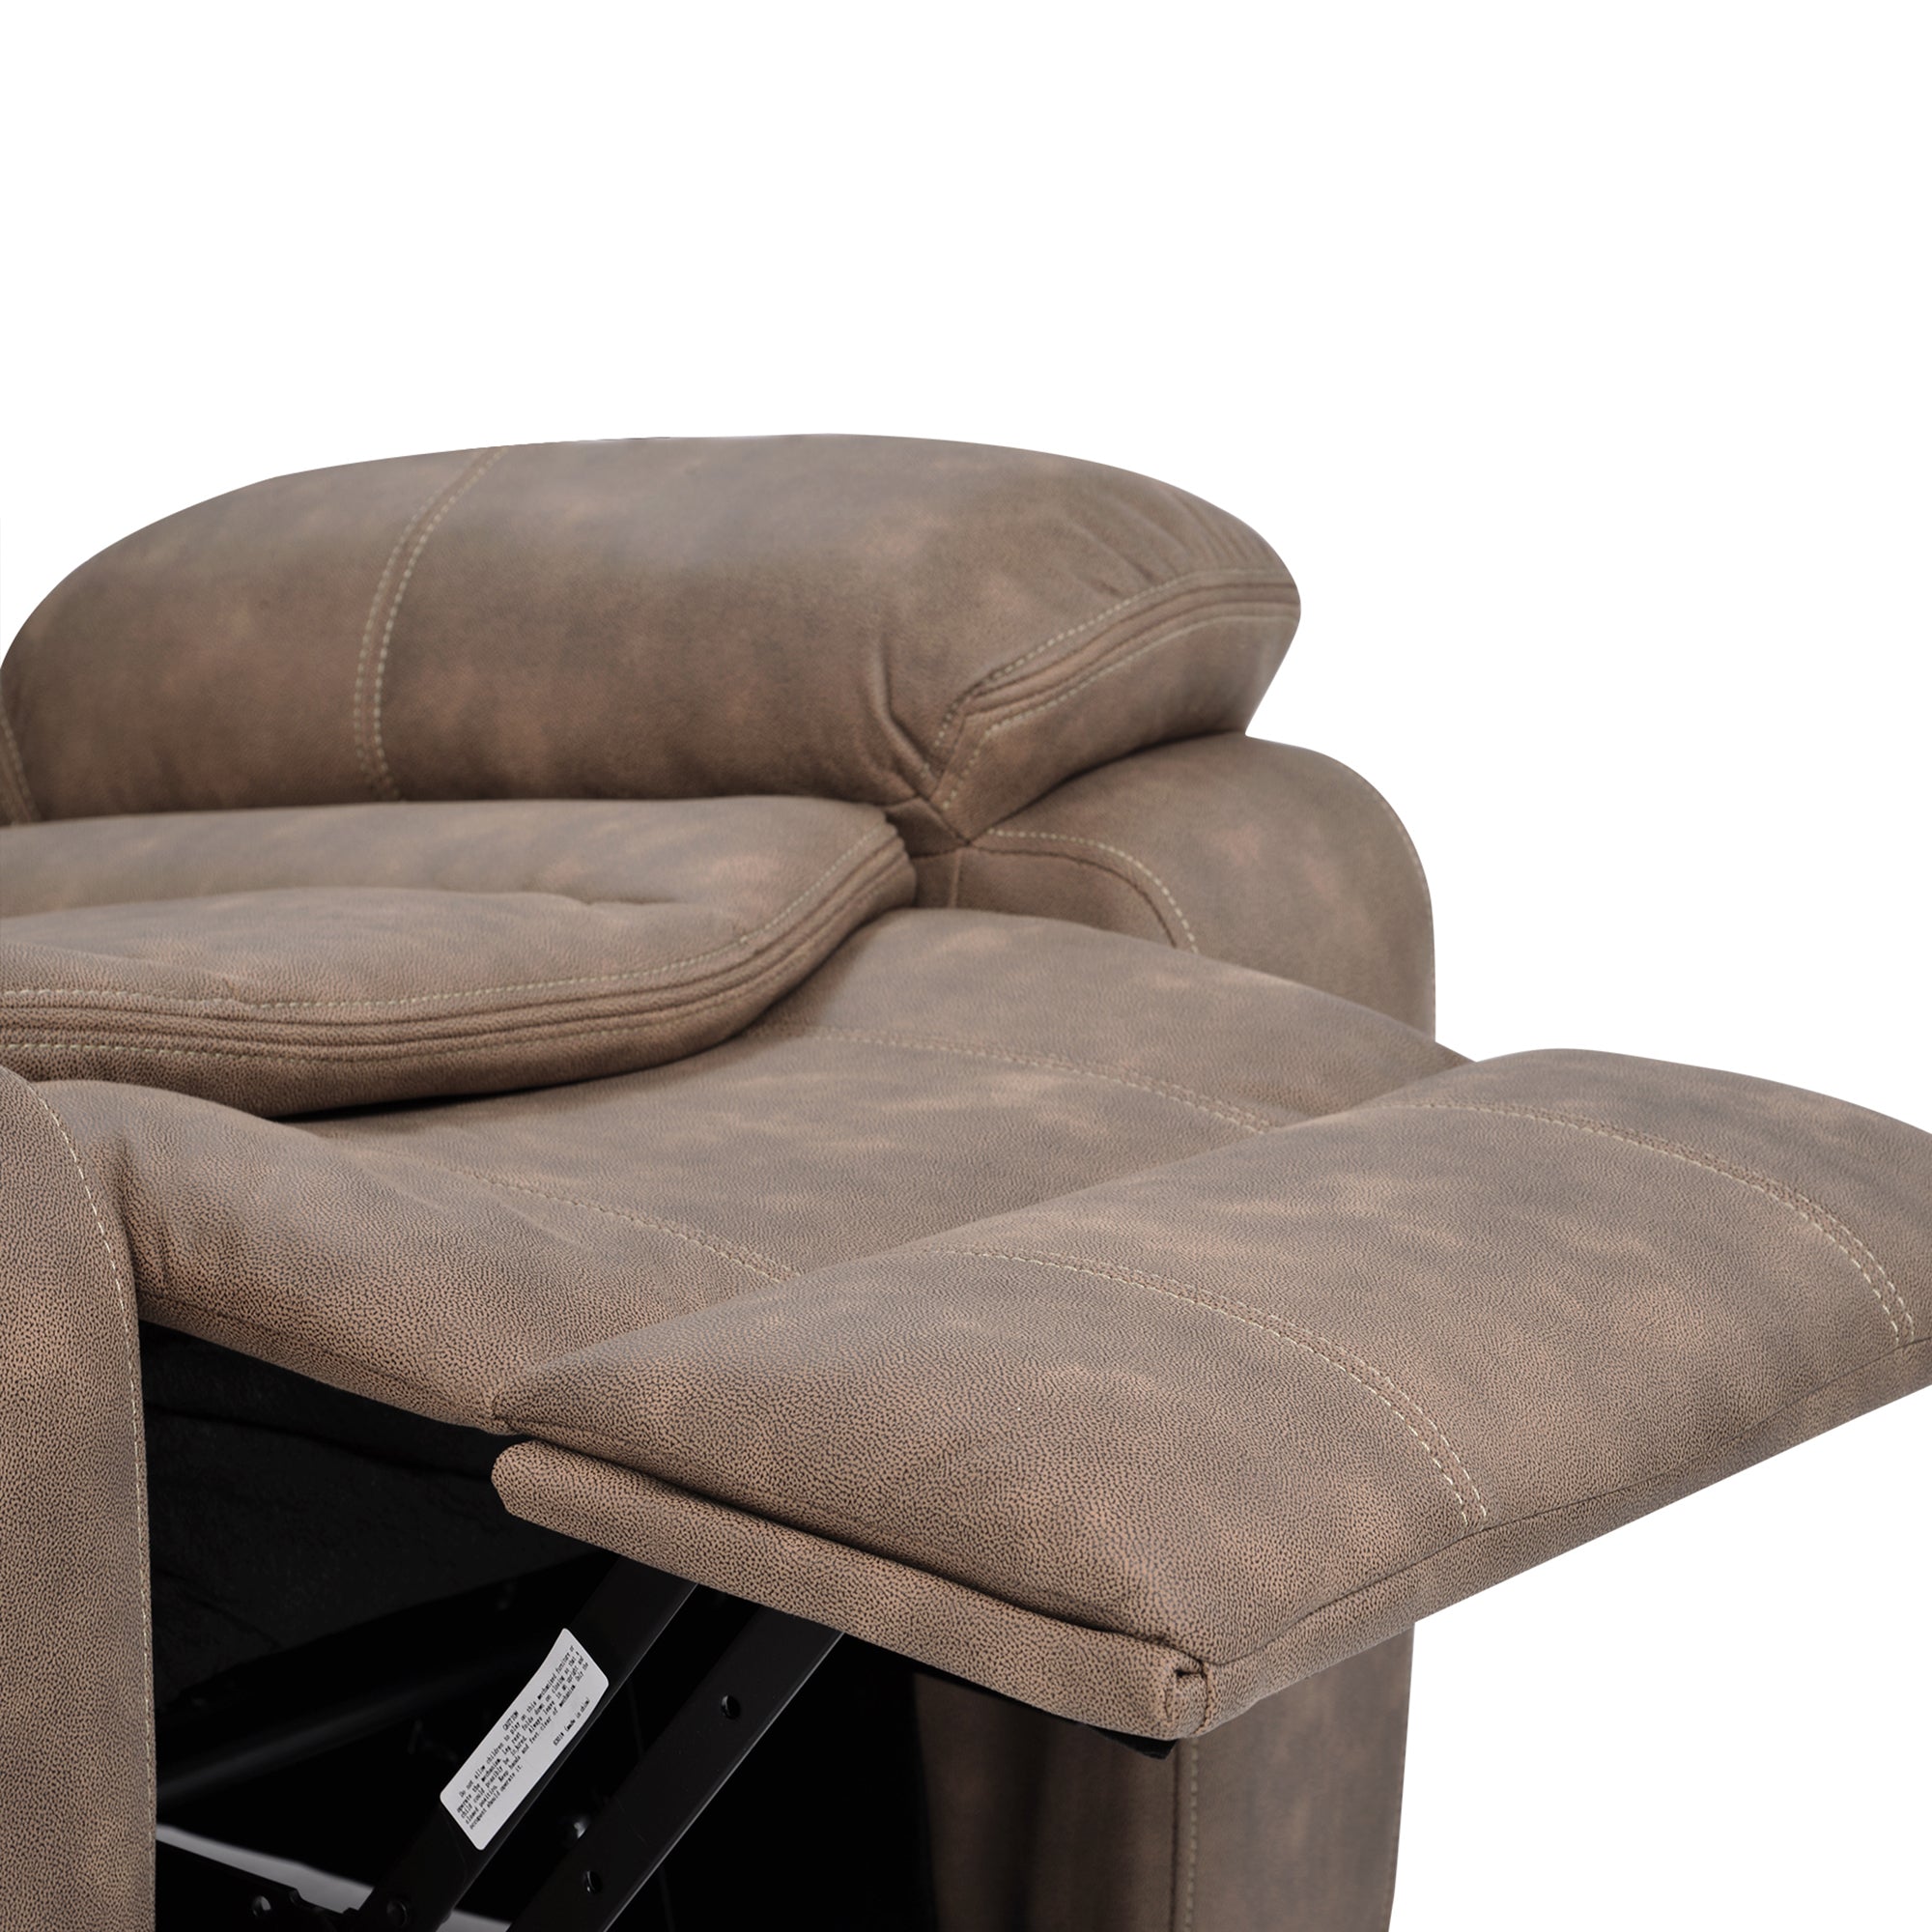 Brown Power Lift Chair with foot extension raised